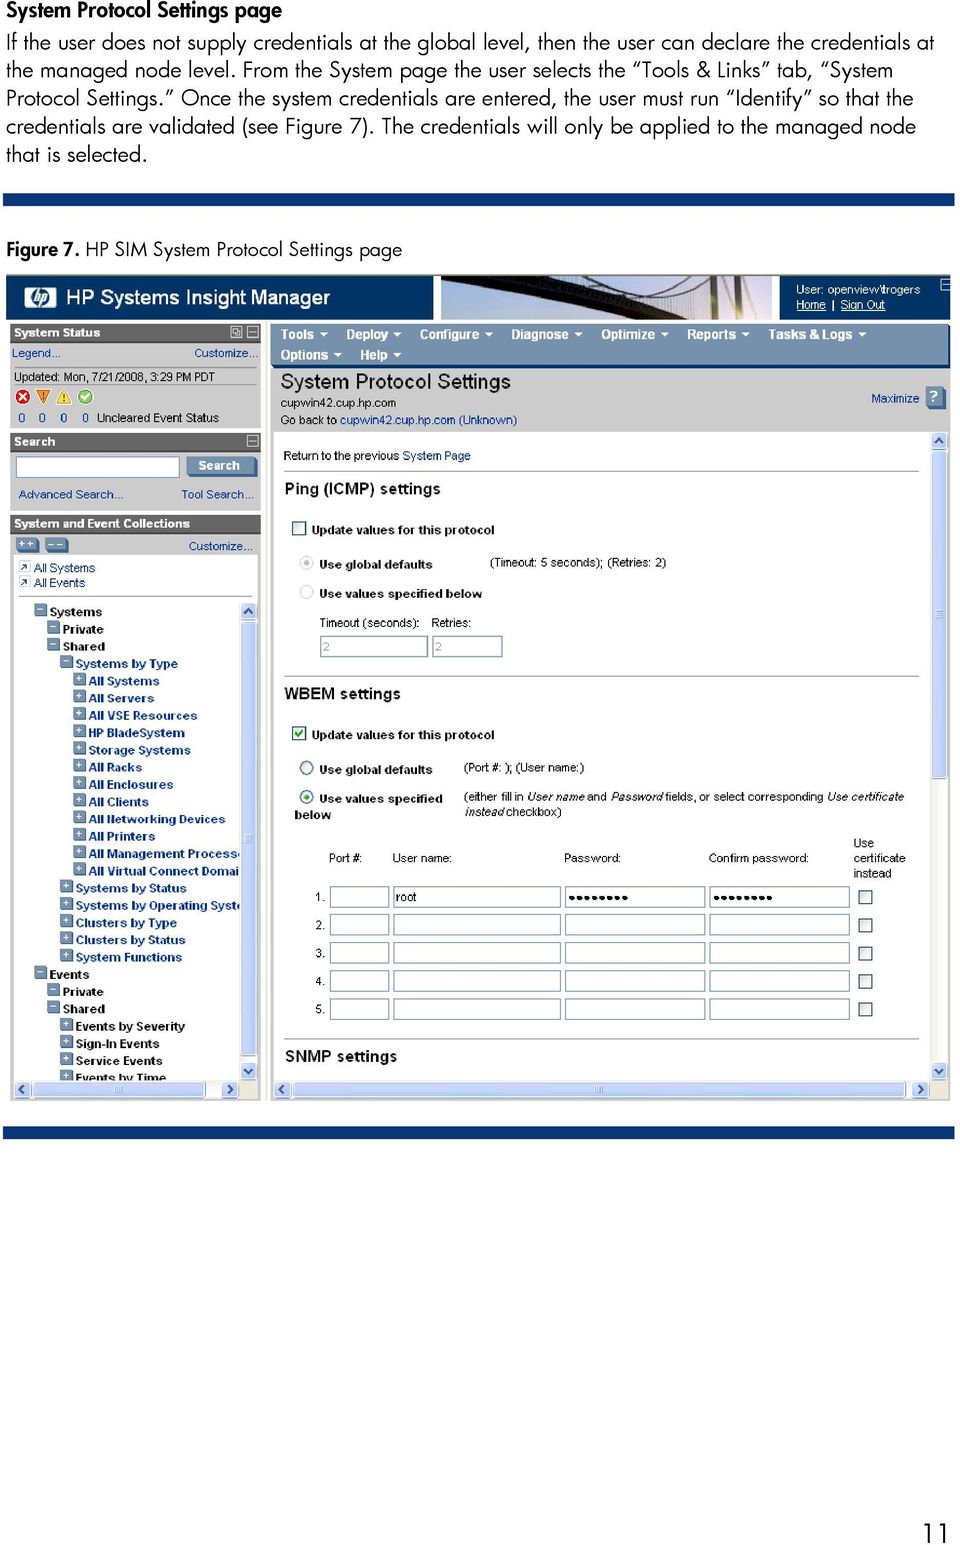 From the System page the user selects the Tools & Links tab, System Protocol Settings.